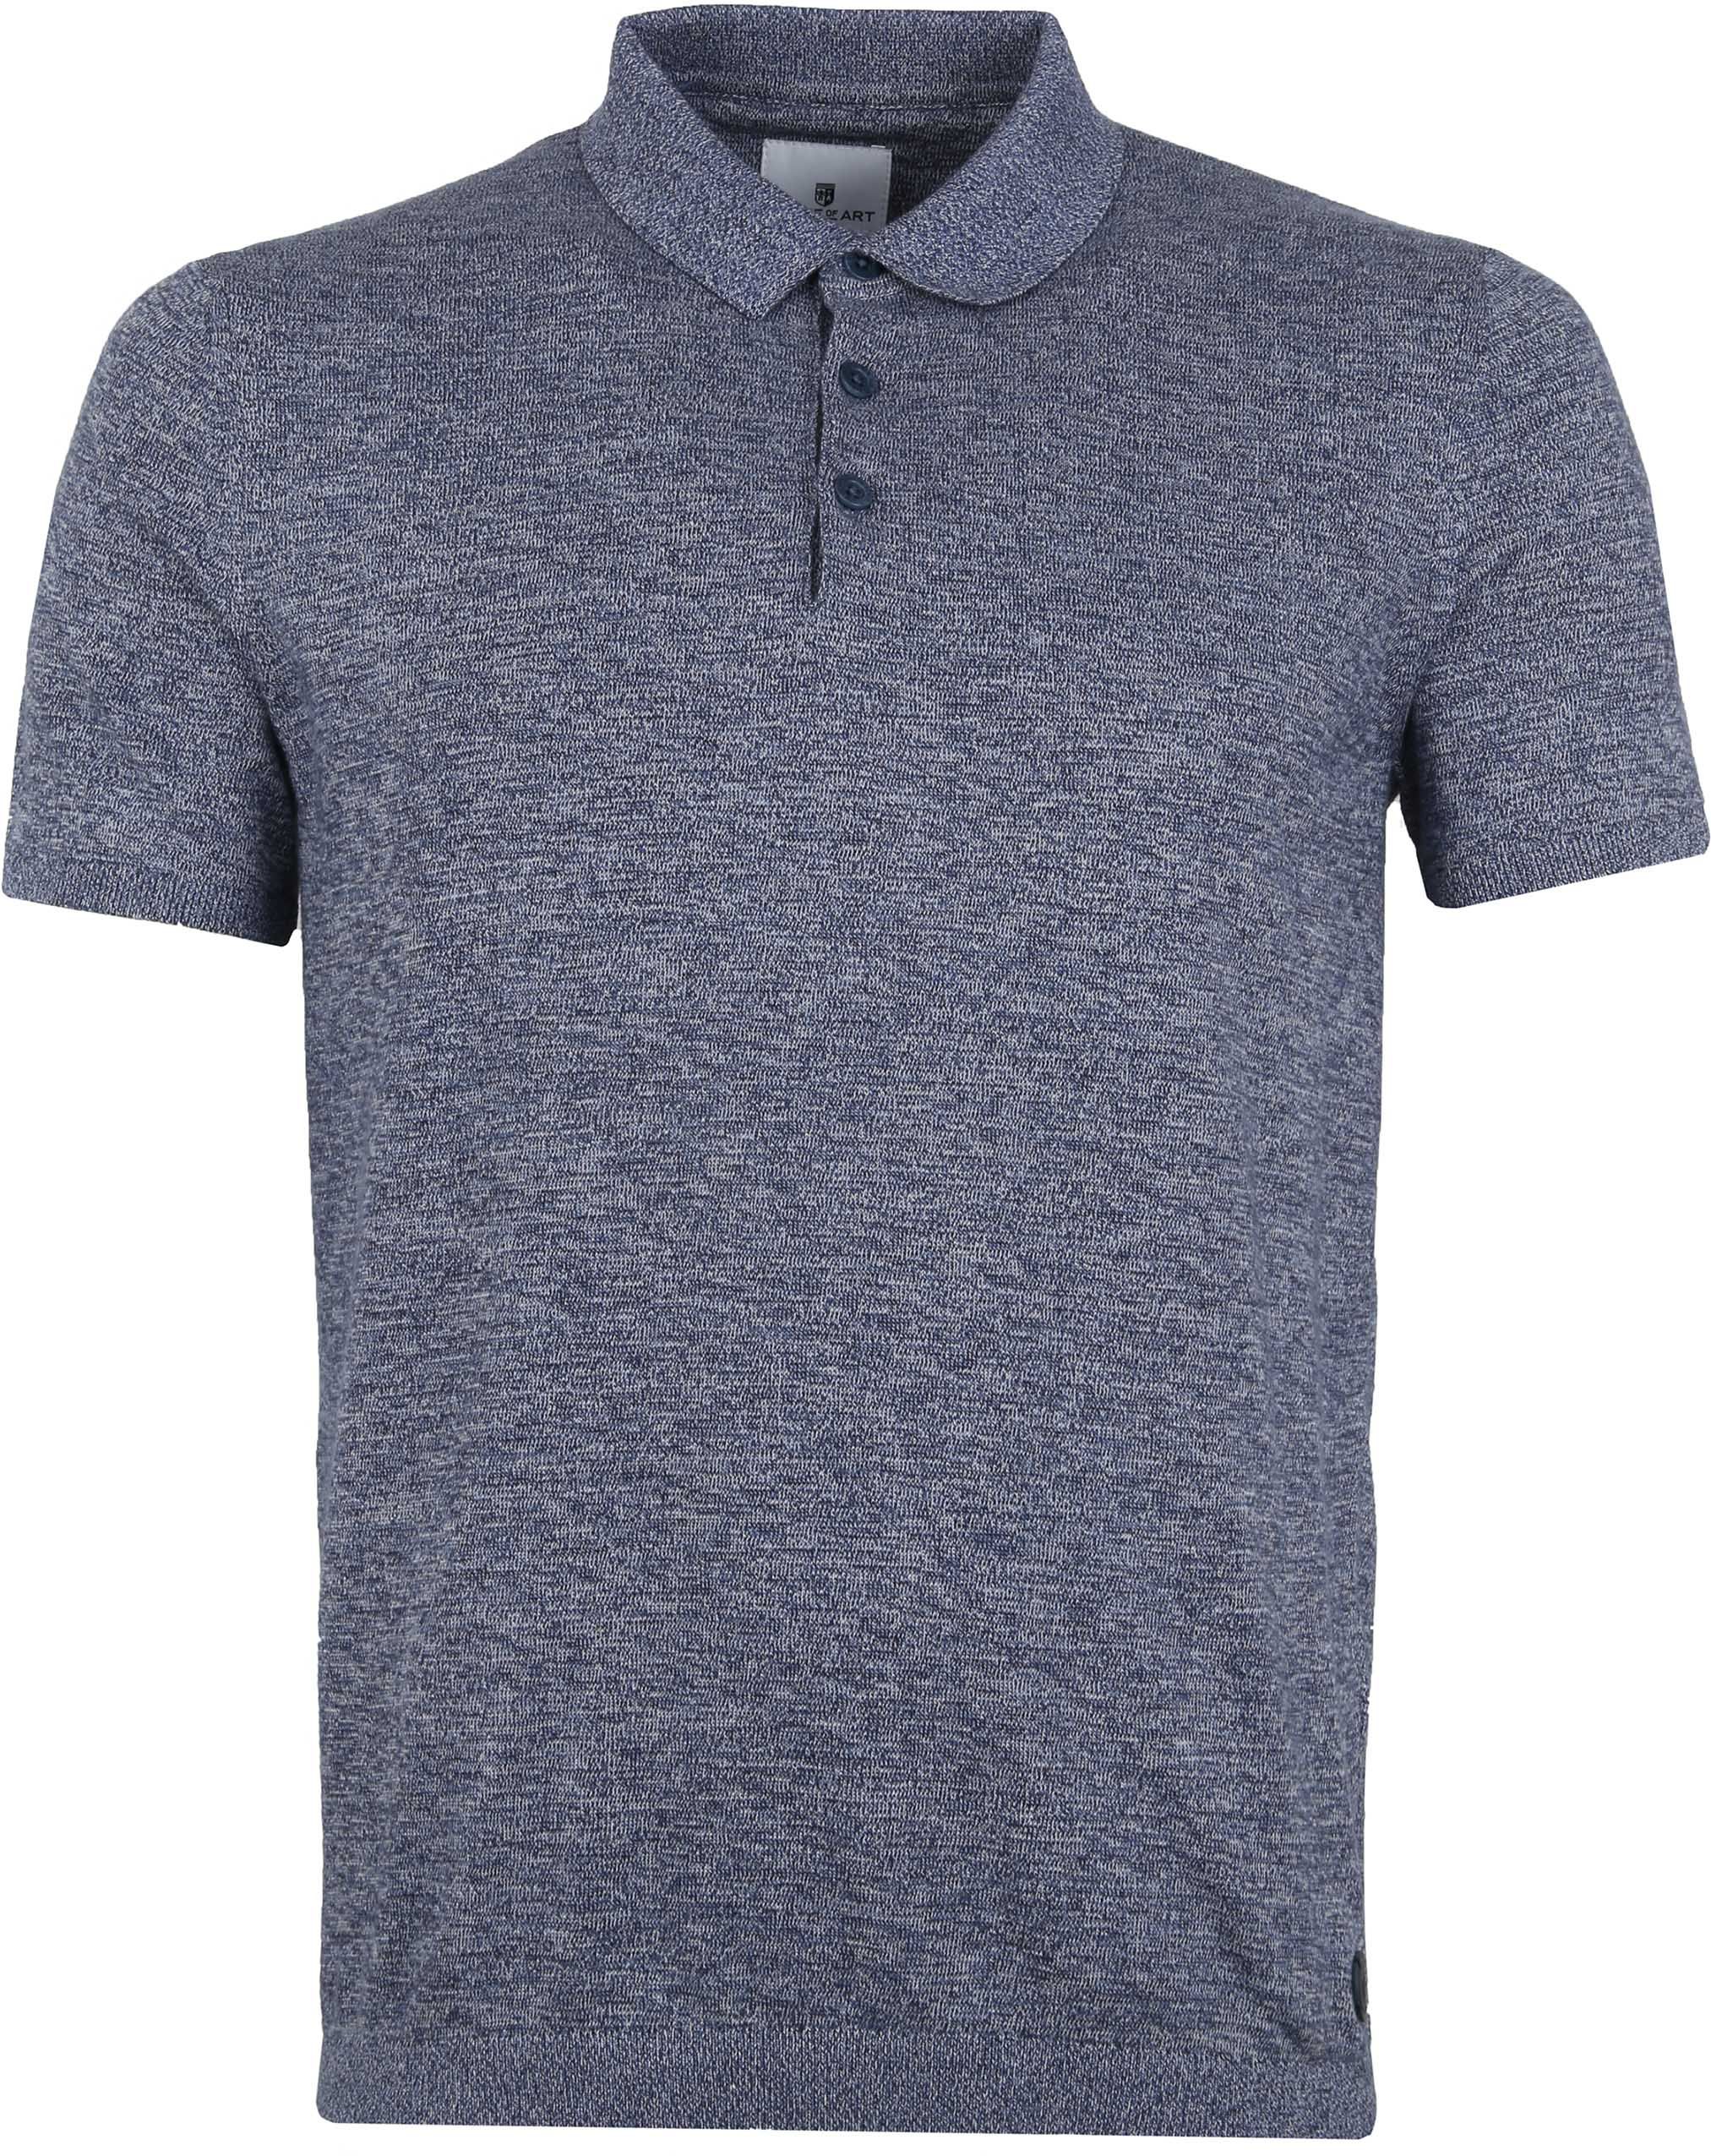 State Of Art Polo Grey size 3XL